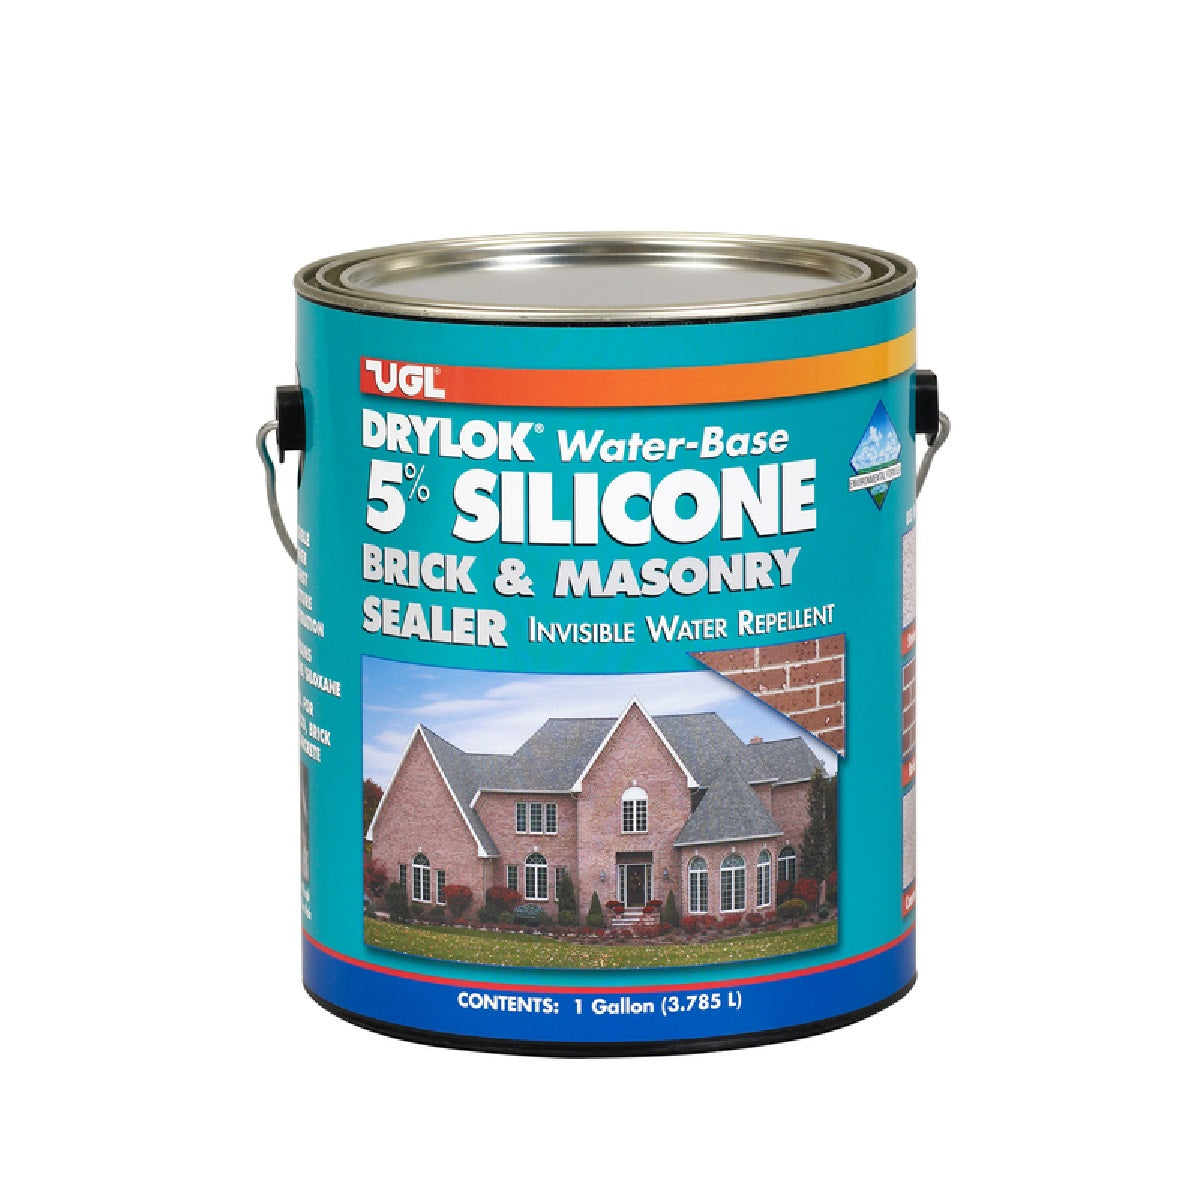 buy masonry sealers at cheap rate in bulk. wholesale & retail painting goods & supplies store. home décor ideas, maintenance, repair replacement parts